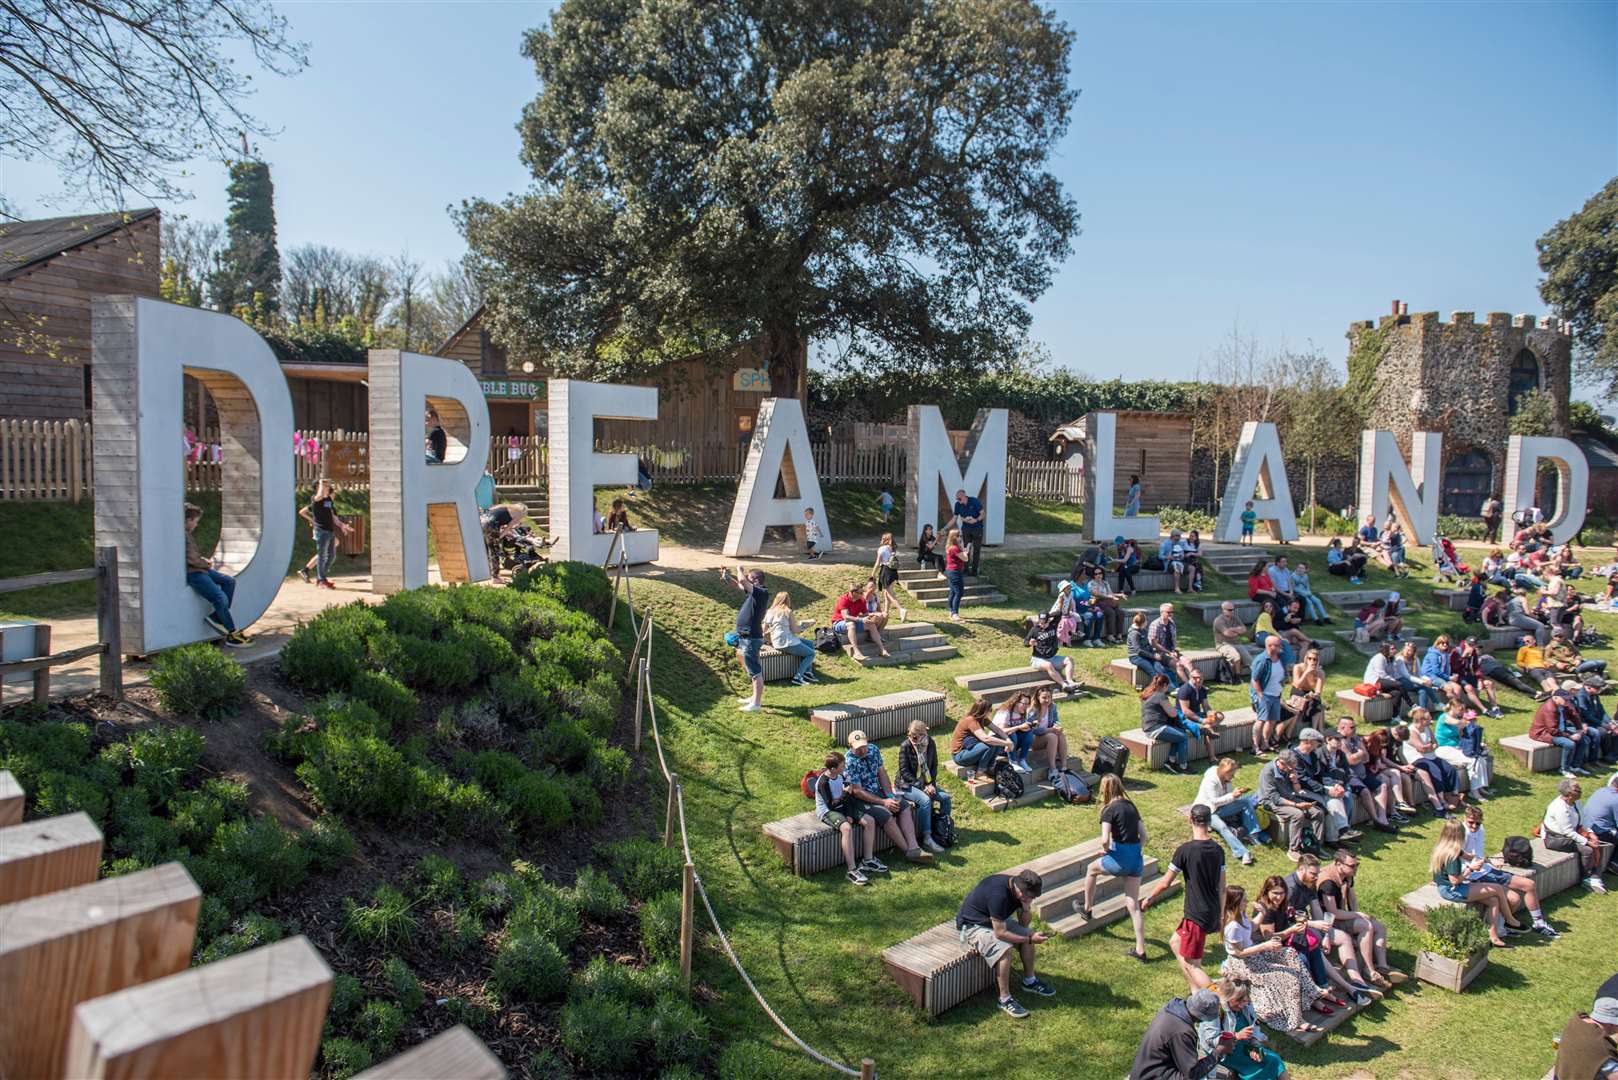 Dreamland has seen artists such as Paul Weller and Noel Gallagher perform on the outdoor stage this summer. Picture: Dreamland